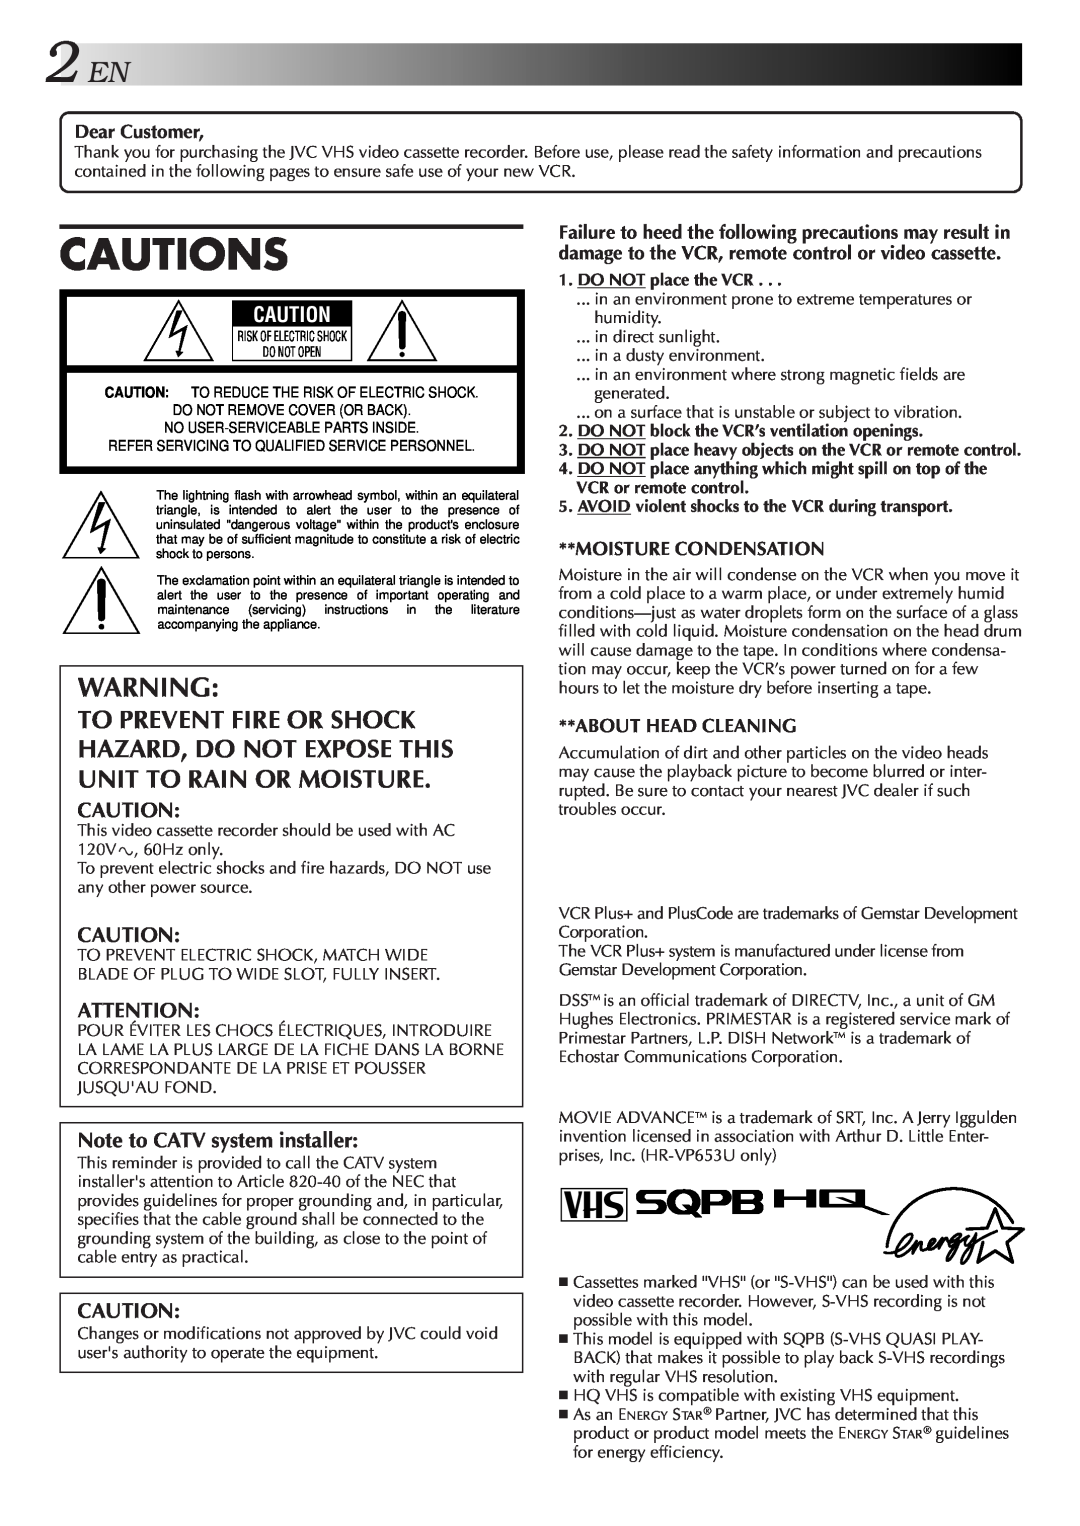 JVC HR-VP653U, HR-VP453U instruction manual Cautions, DO NOT place the VCR, DO NOT block the VCR’s ventilation openings 